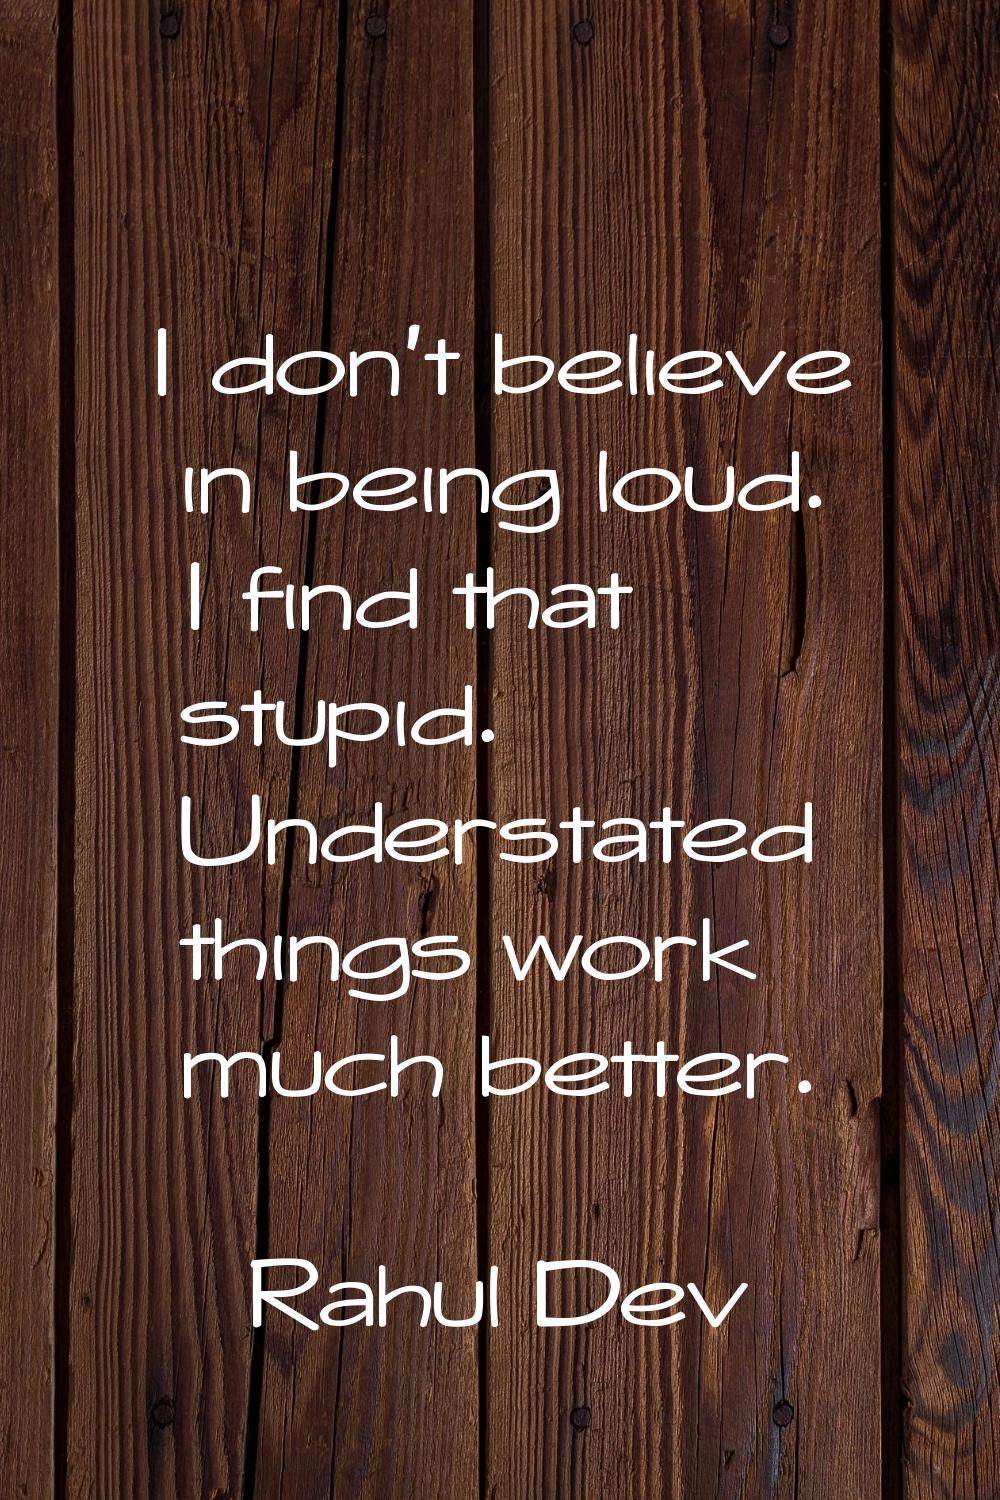 I don't believe in being loud. I find that stupid. Understated things work much better.